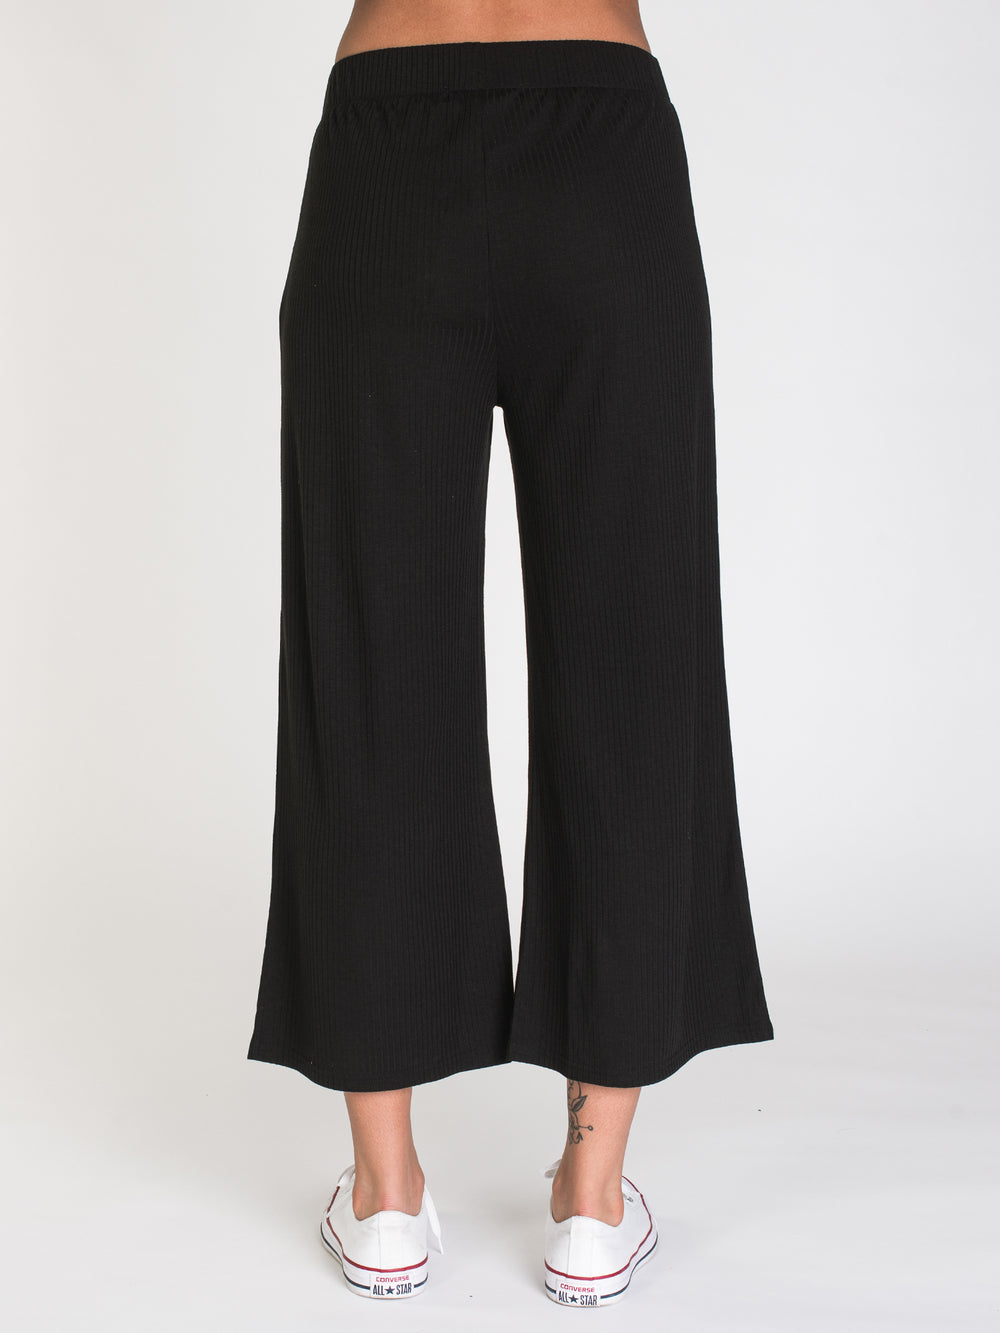 HARLOW BREANNA CROPPED KNIT PANT - DÉSTOCKAGE